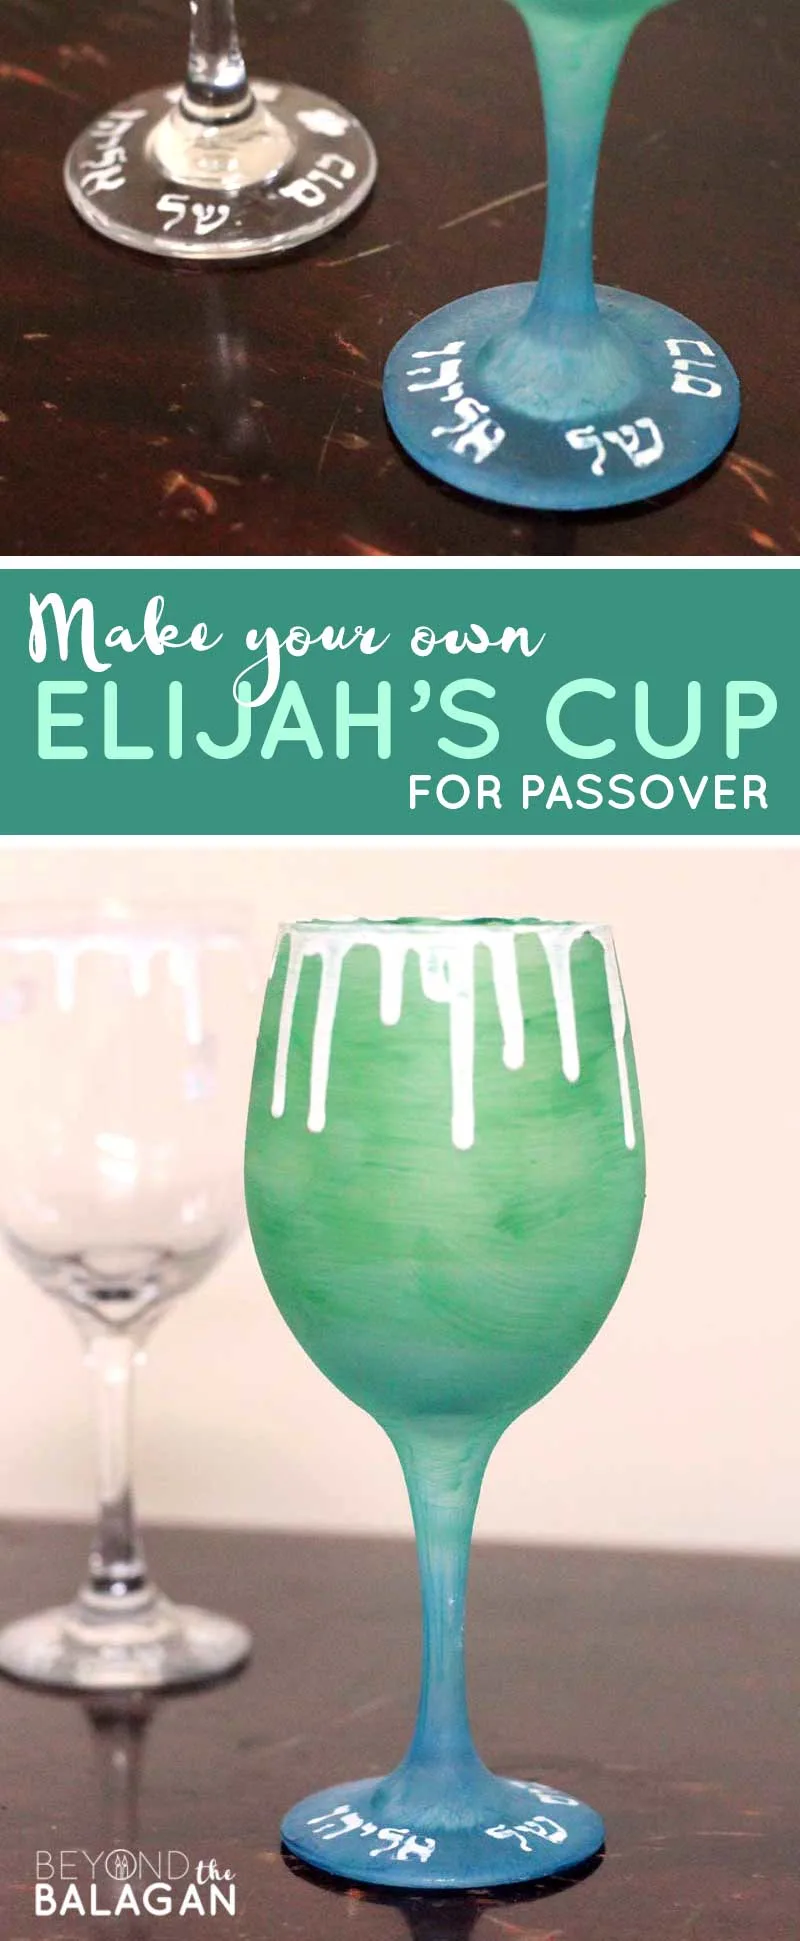 Make this fun Pesach craft - a DIY kos shel eliyahu. This Elijah's cup is a fun sea glass painting project with a unique twist and is the perfect Passover crafts for adults and kids. This cool idea for the passover seder upgrades the cup of elija the prophet. #pesach #passover #jewishholidays